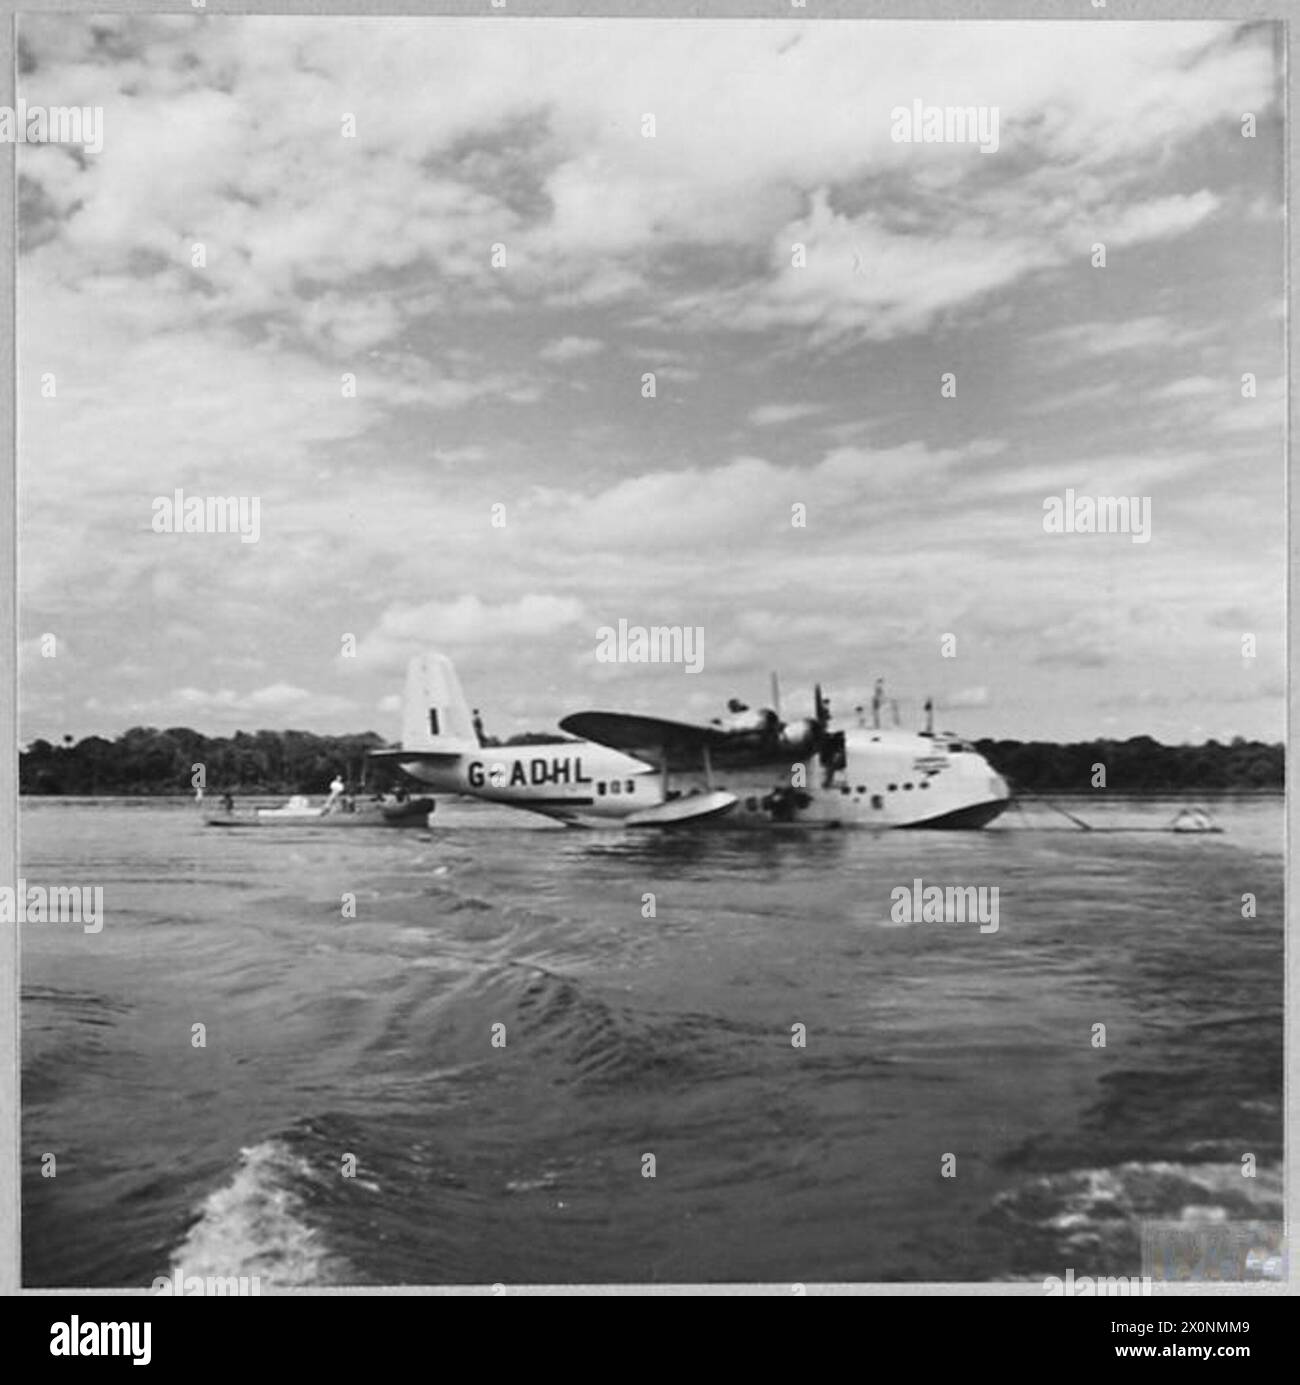 BRITAIN'S CIVIL AIRLINES CARRY ON IN WAR TIME - For story see CH.14052 Picture (issued 1944) shows - The BOAC Empire flyingboat 'CANOPUS' refuelling at a halt on the Congo River during a trans-African flight. A local peculiatiry is that owing to the swiftness of the stream, the refuelling launch has to make fast to the flyingboat's stern. Photographic negative , Royal Air Force Stock Photo